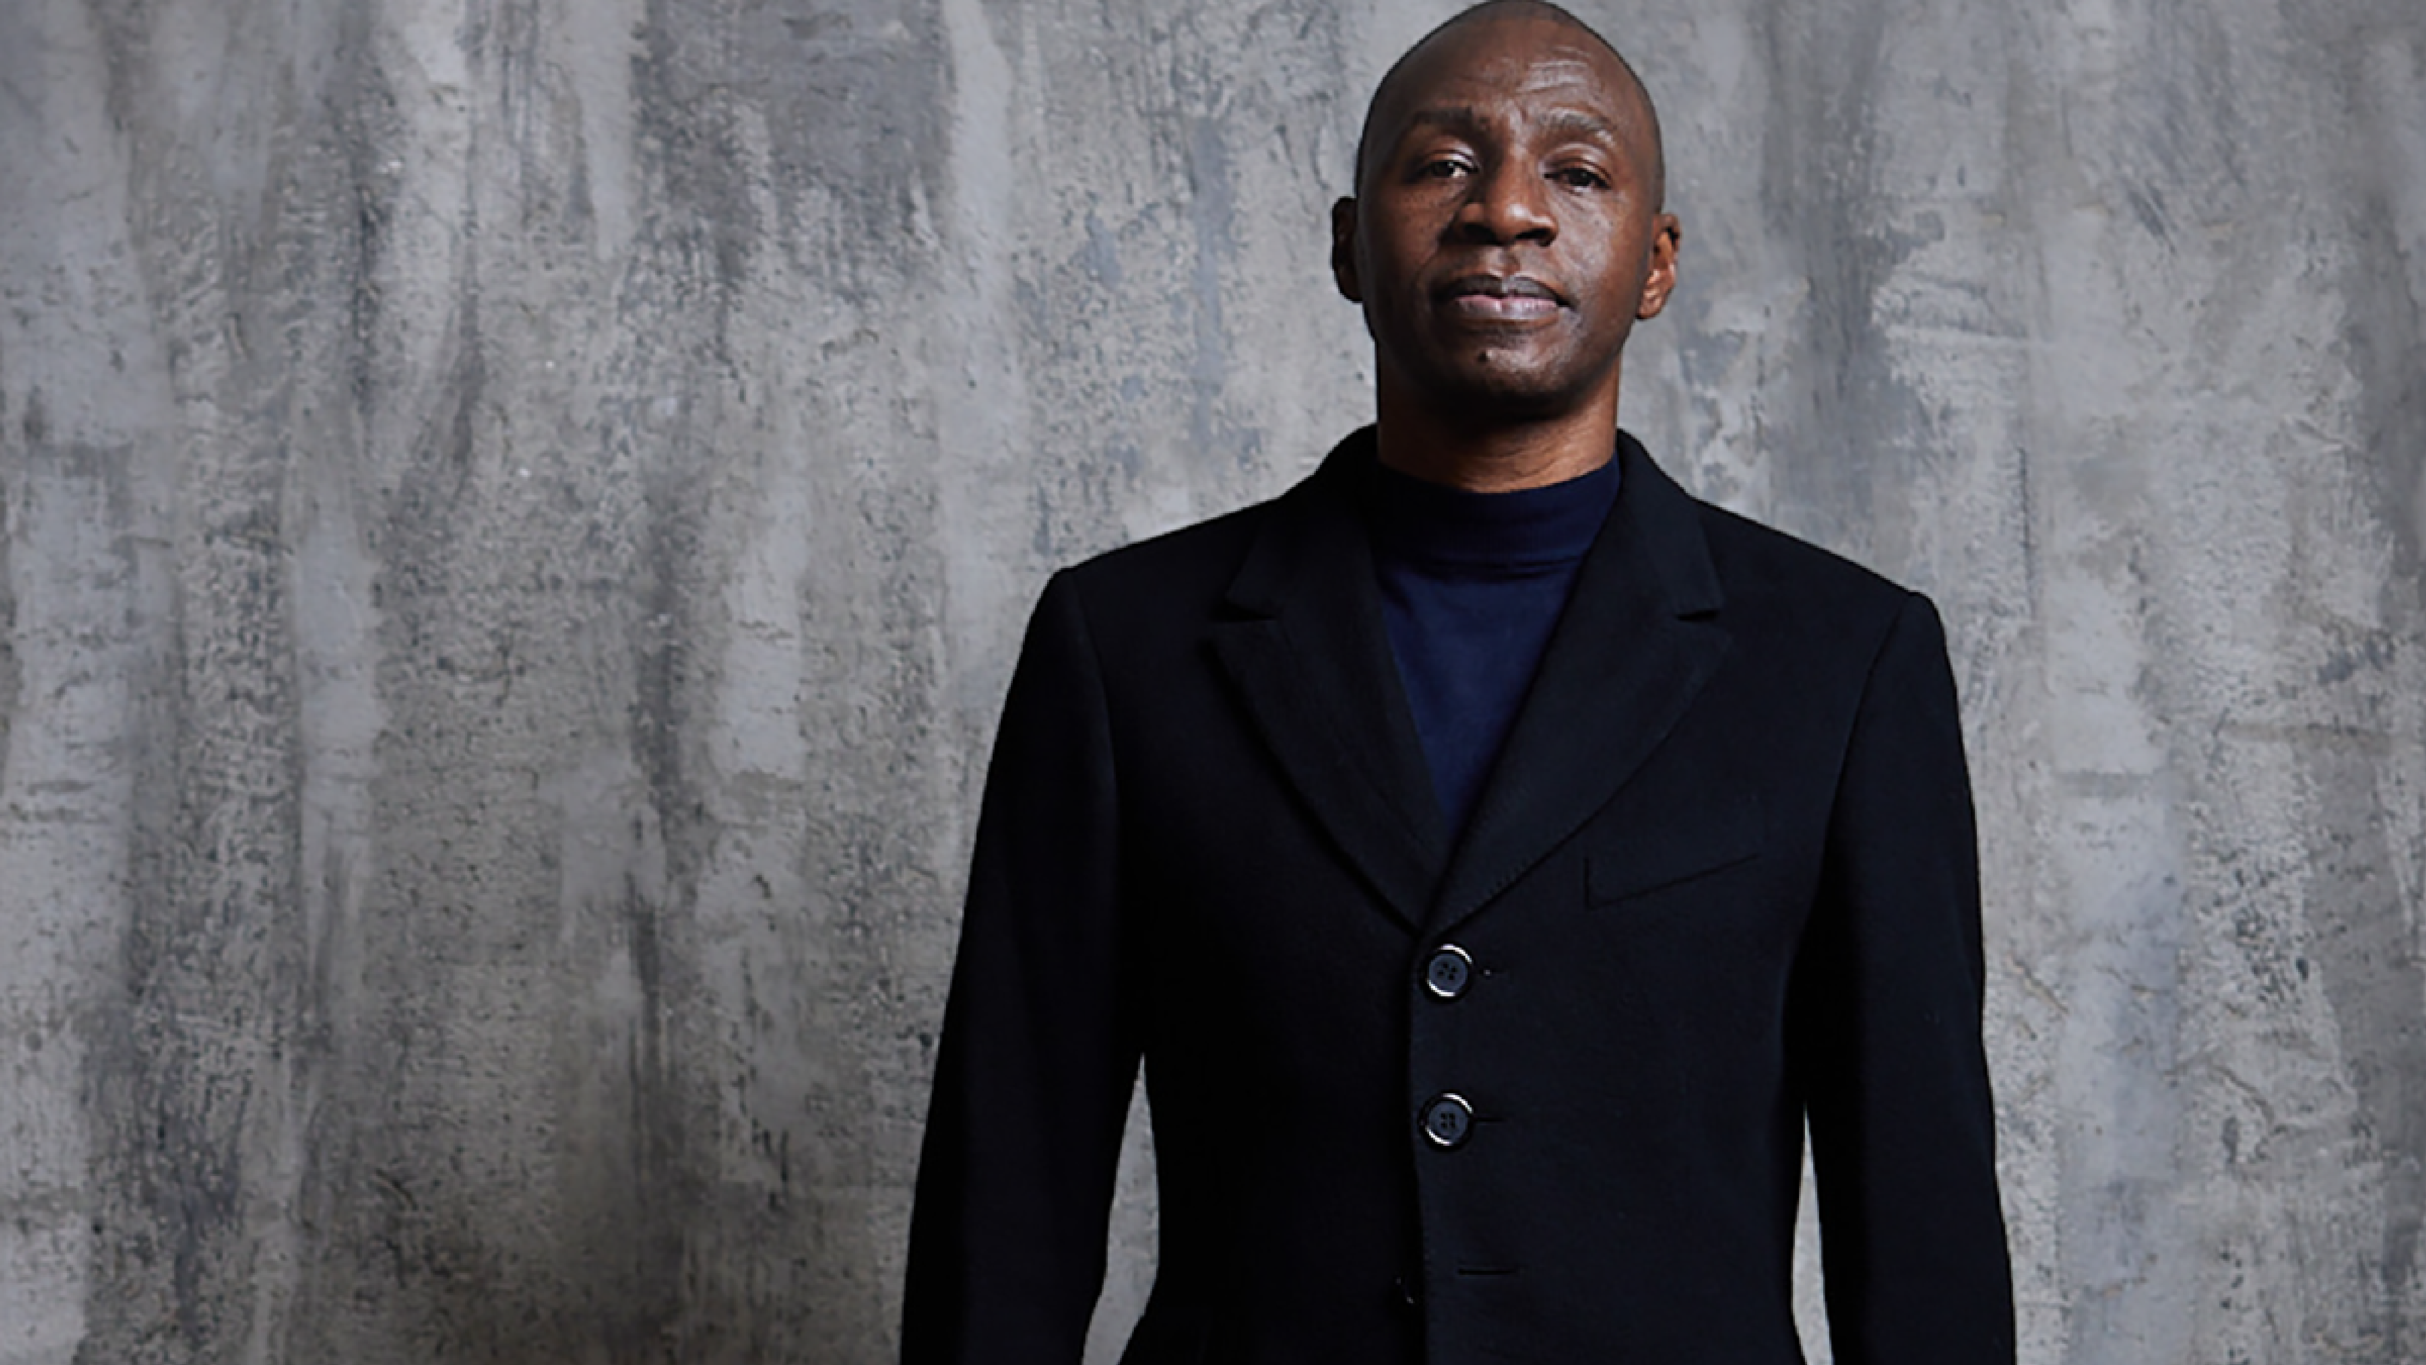 Tunde - The Voice of Lighthouse Family in Bristol promo photo for Ticketmaster presale offer code